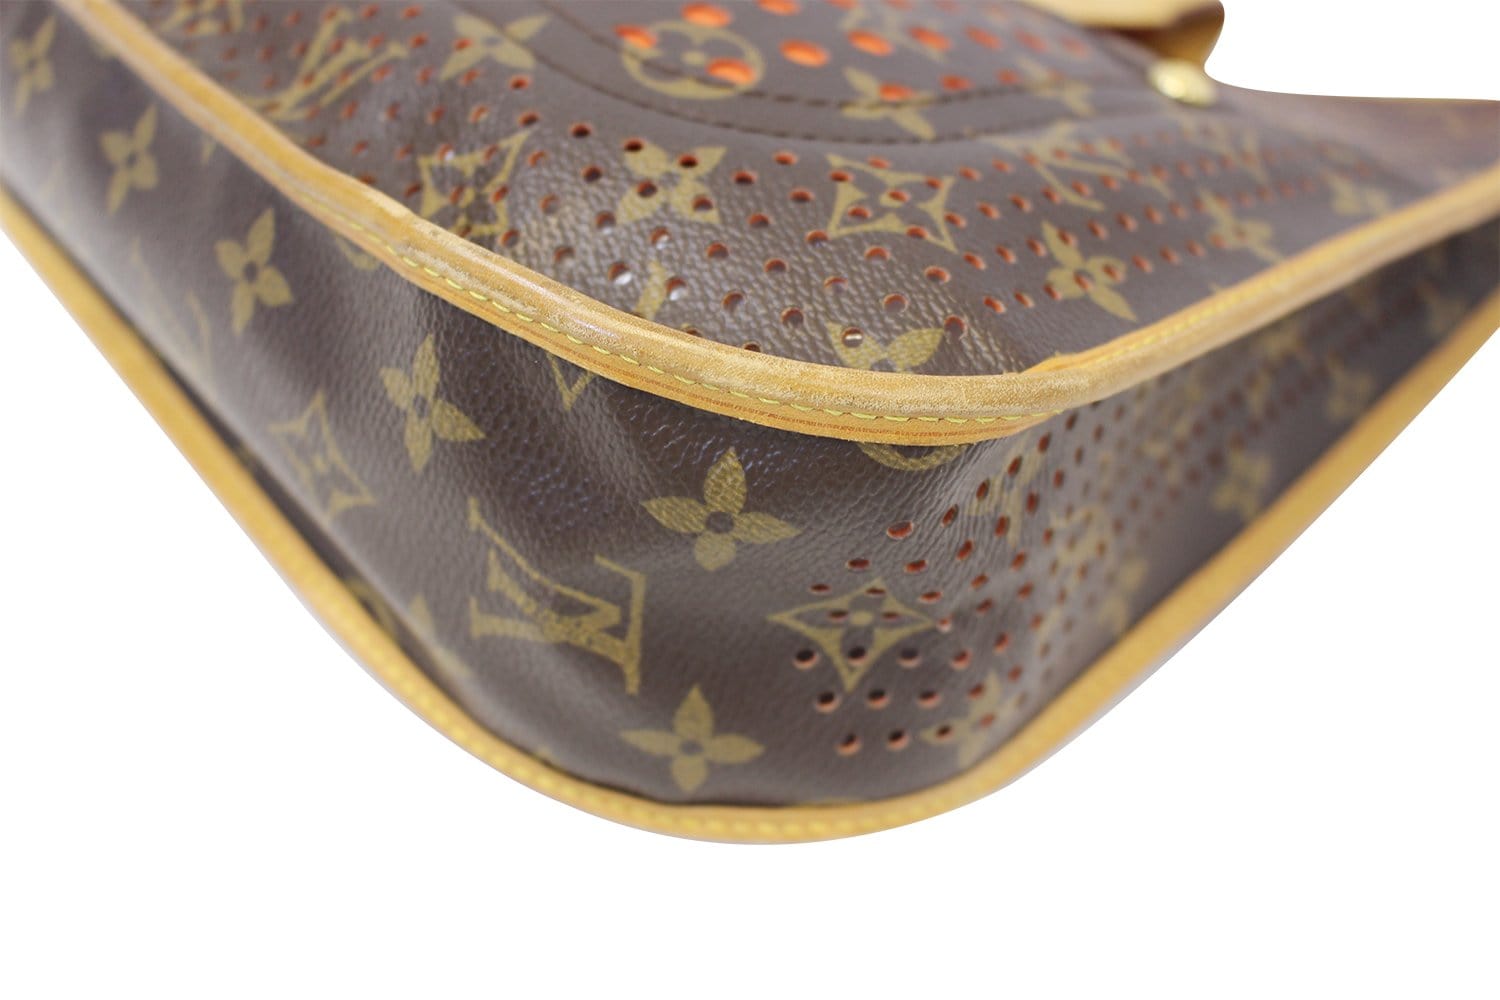 Louis Vuitton Limited Edition Orange Monogram Perforated Musette